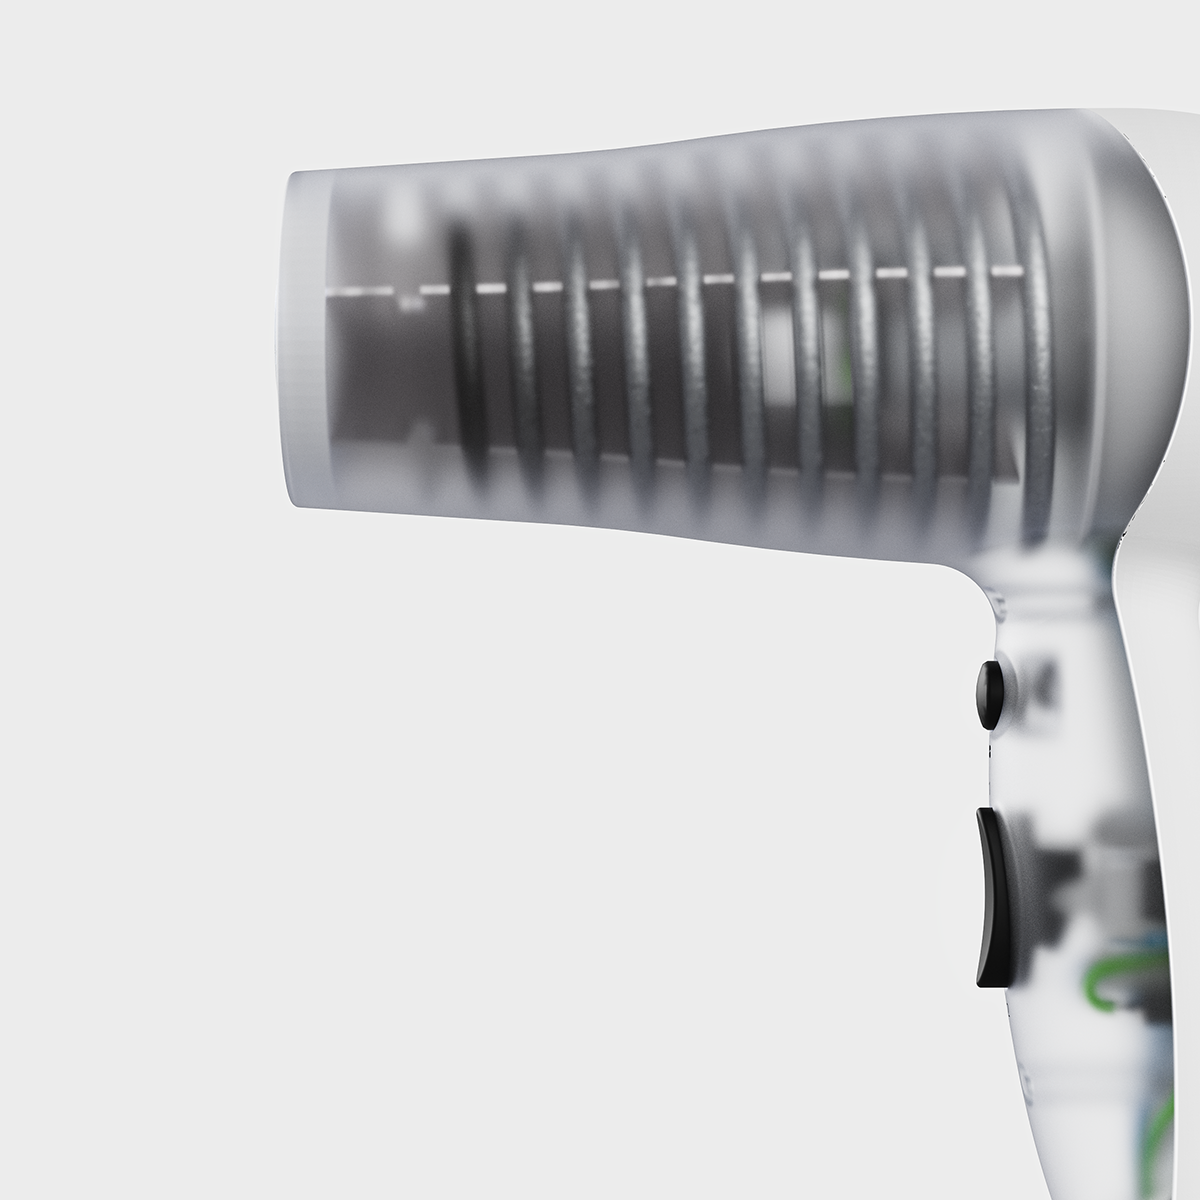 Rendering of a translucent hairdryer, side view